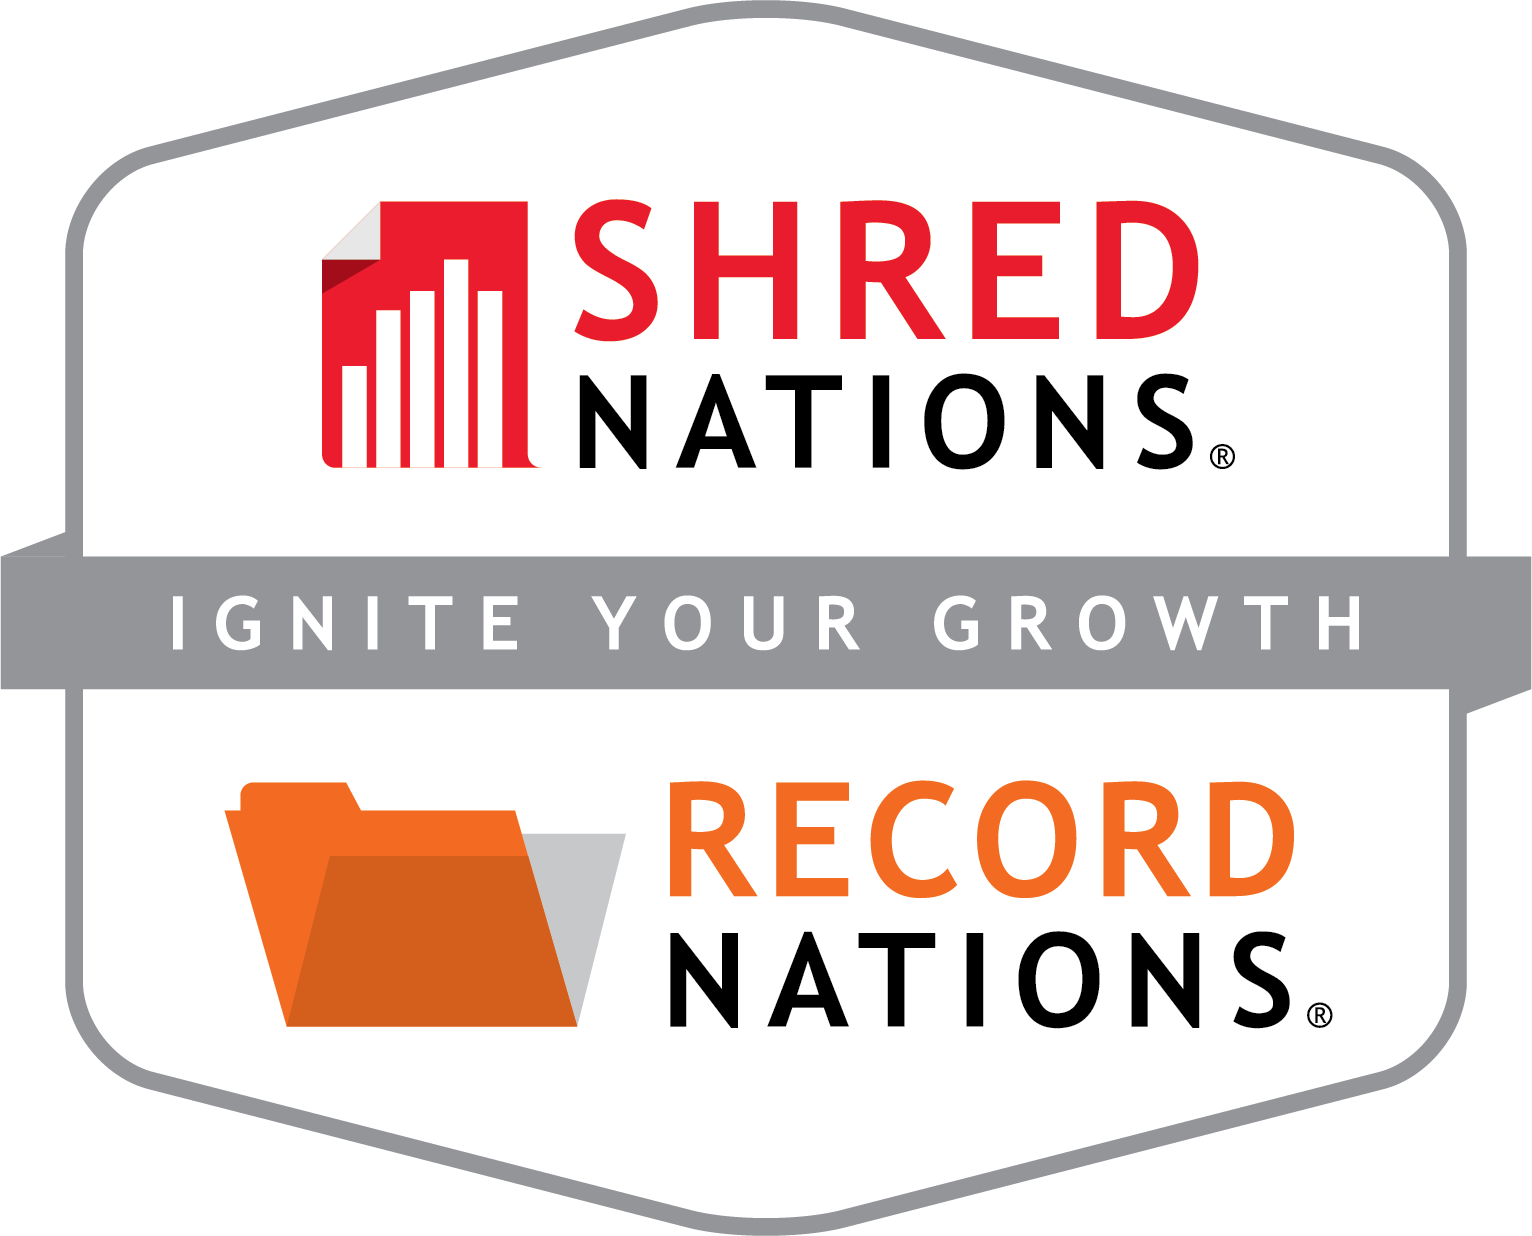 Record Nations | Shred Nations